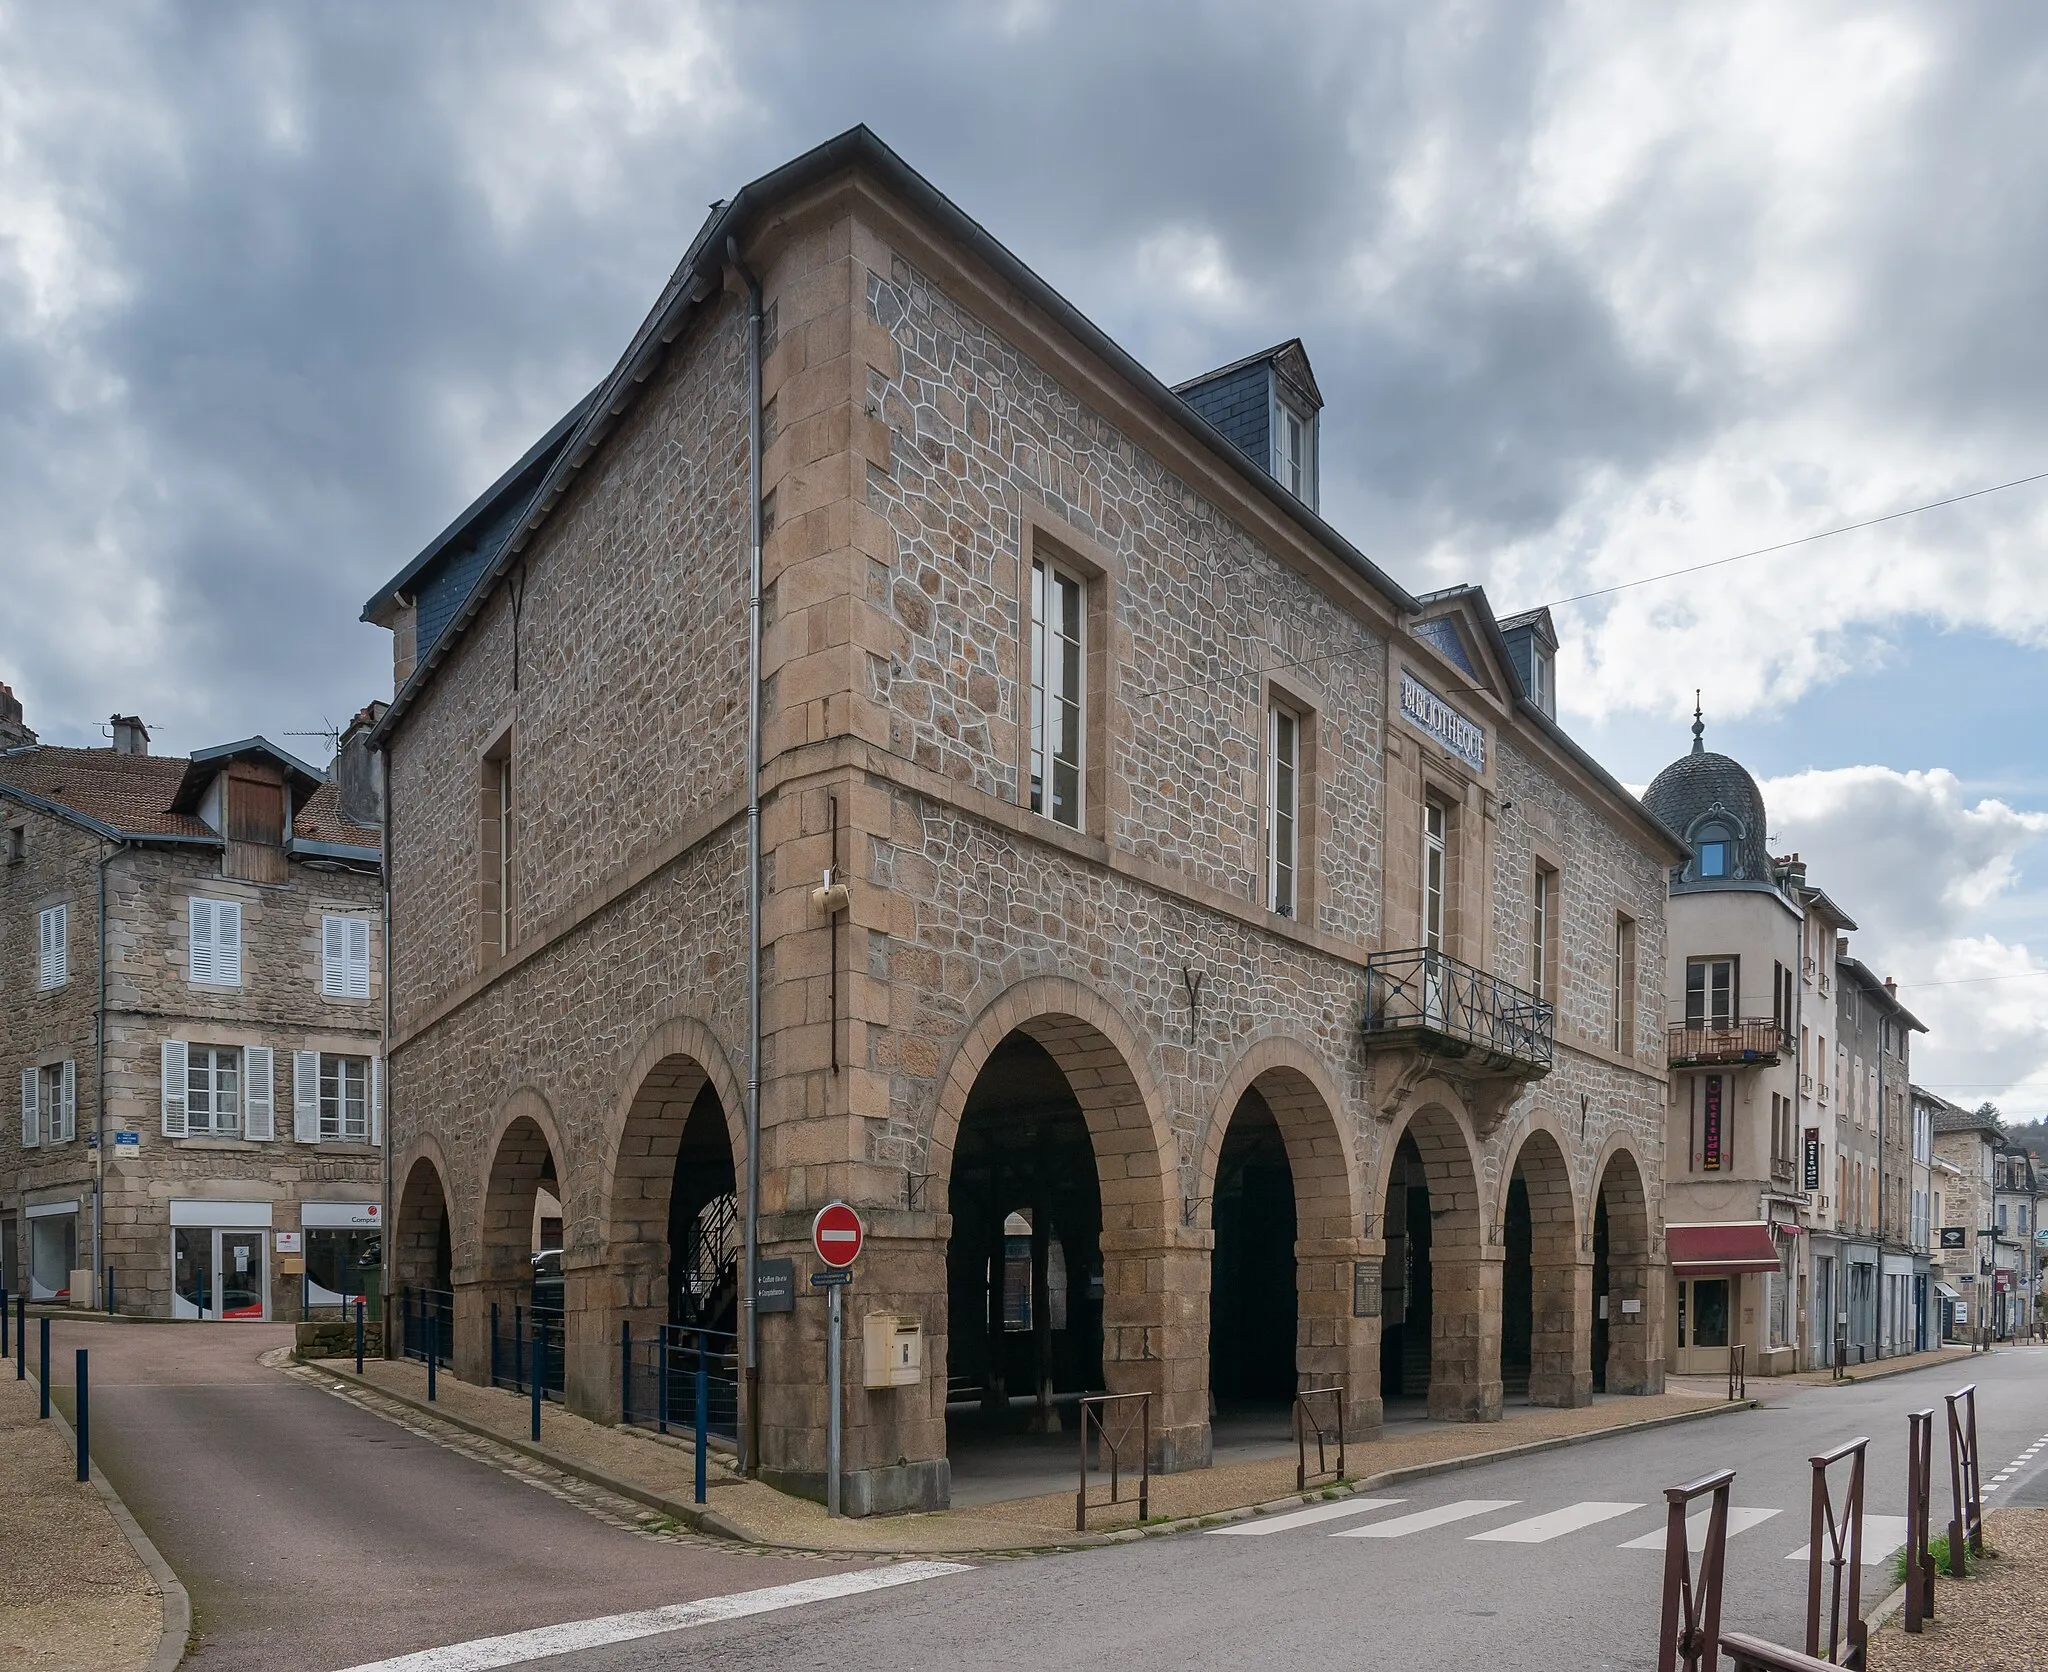 Image of Limousin